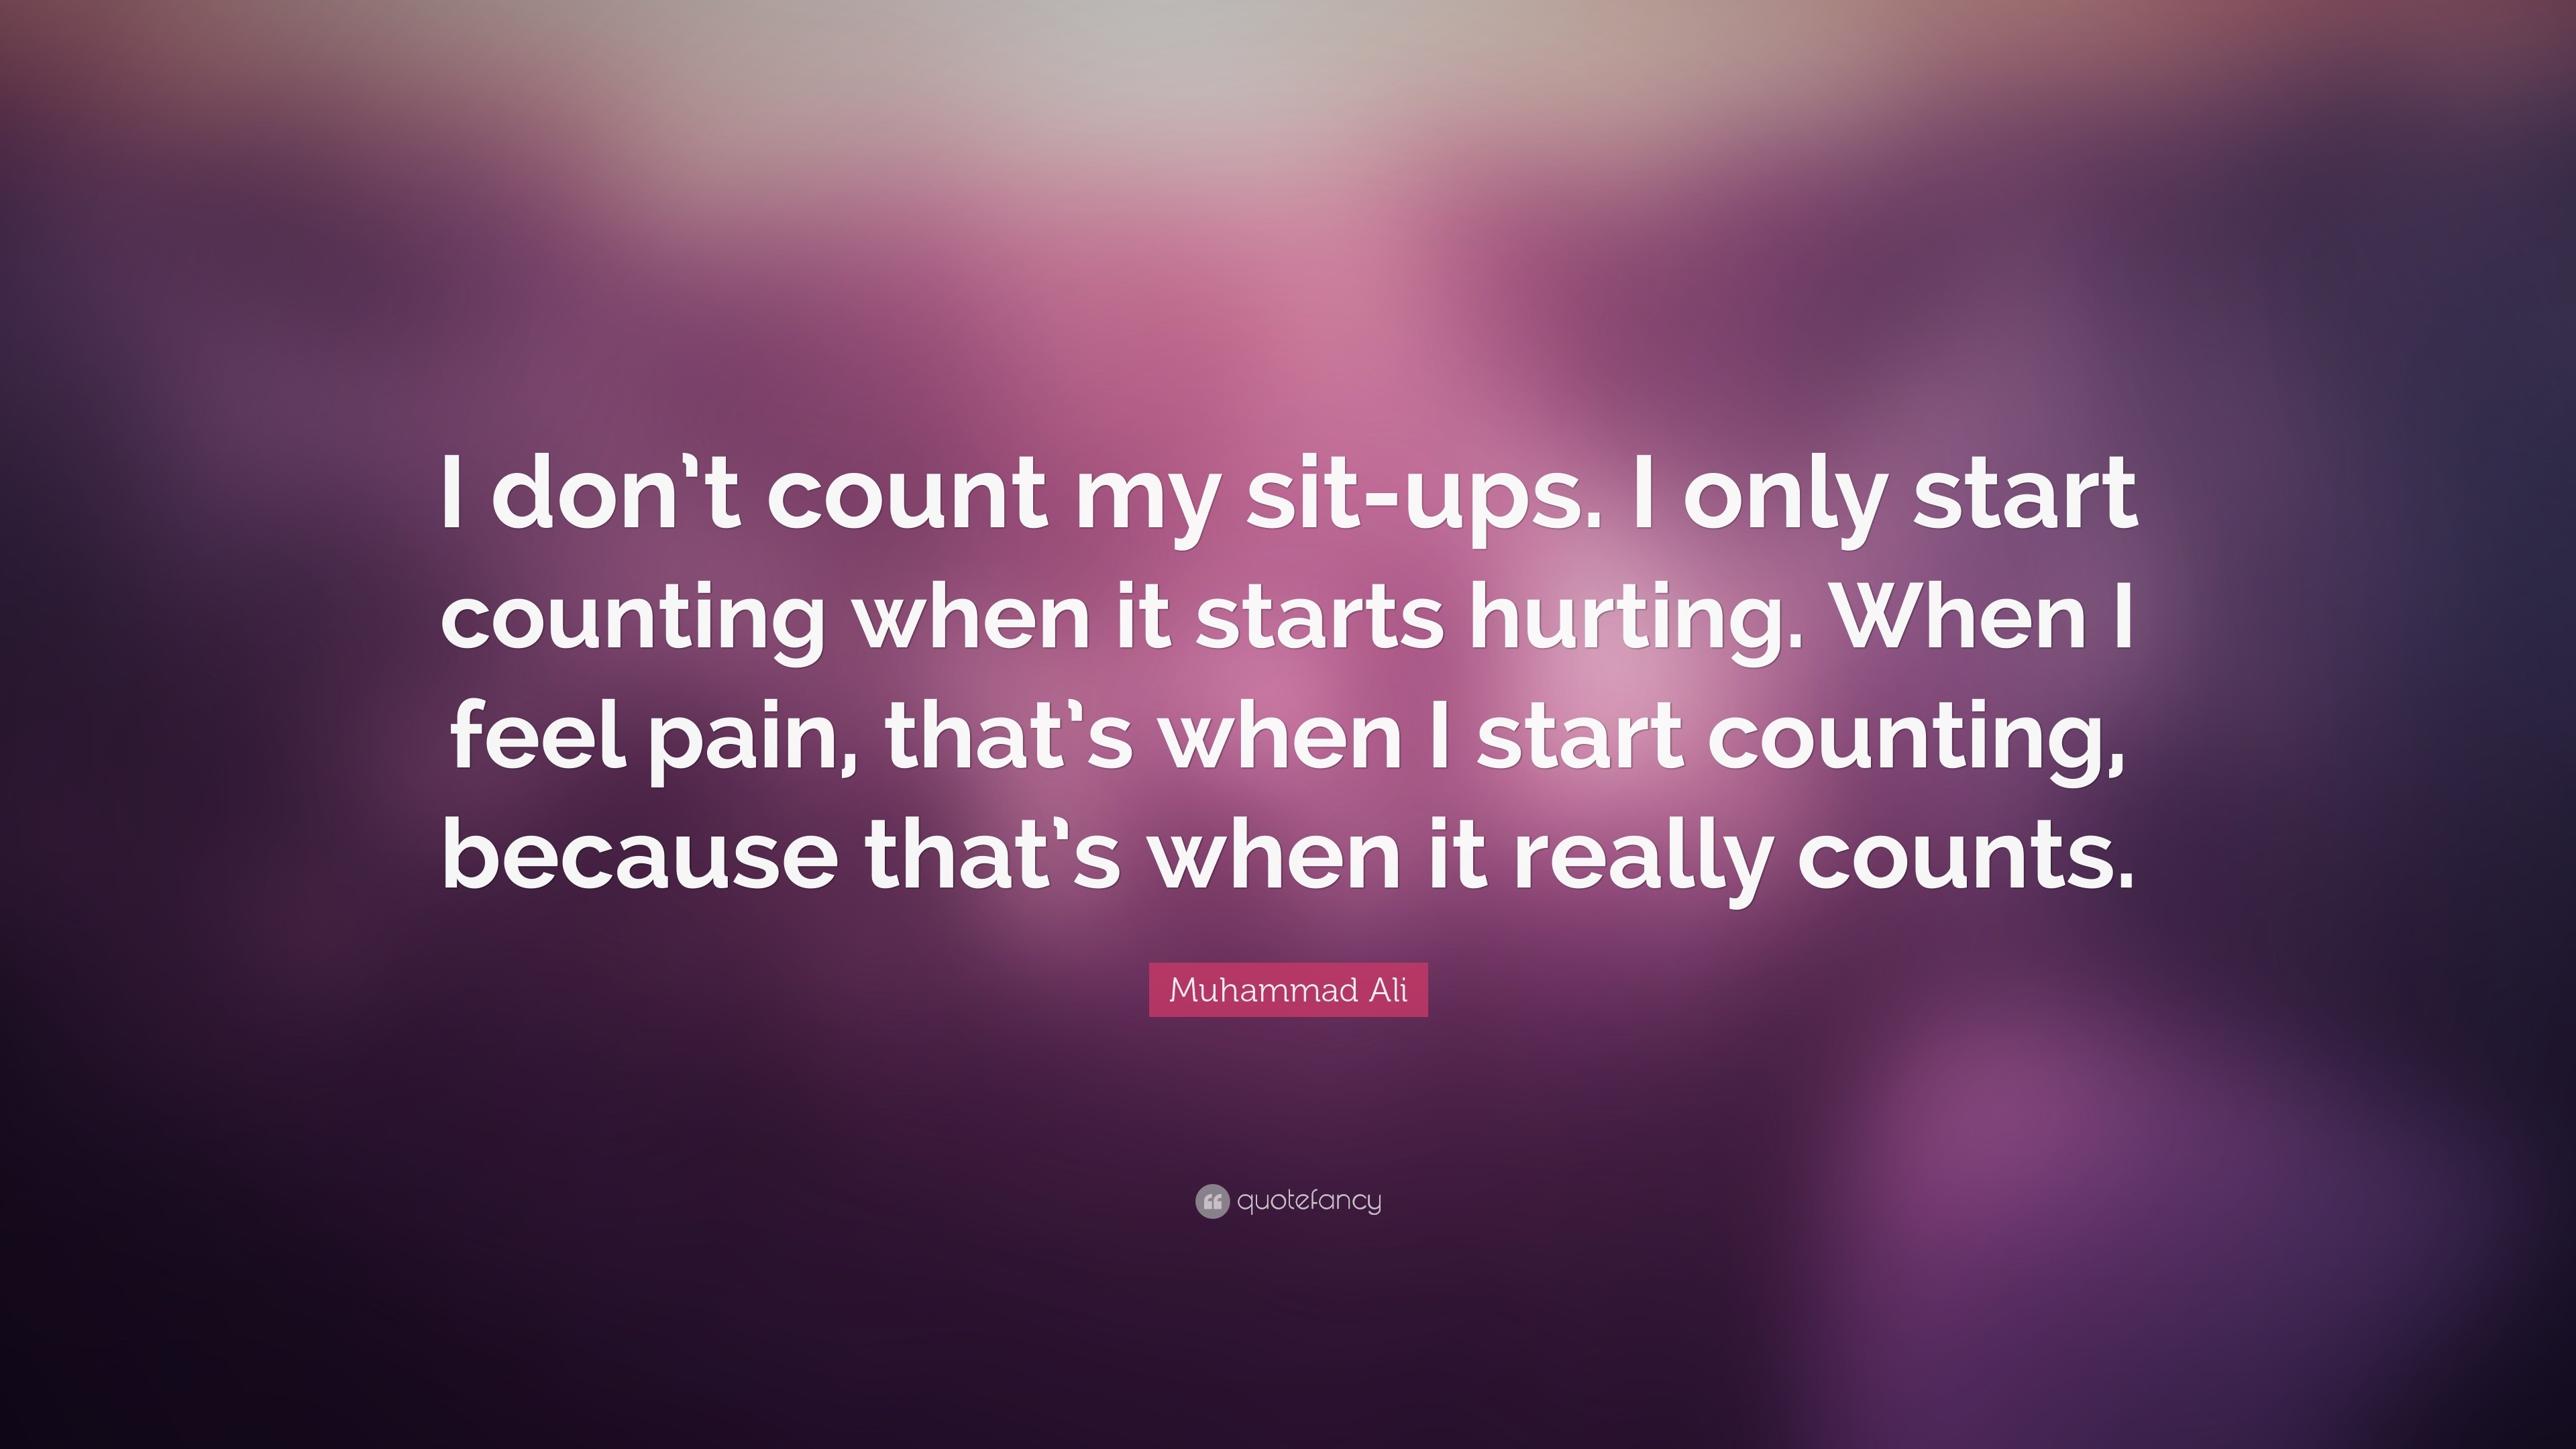 3840x2160 Muhammad Ali Quote: “I don't count my sit-ups. I